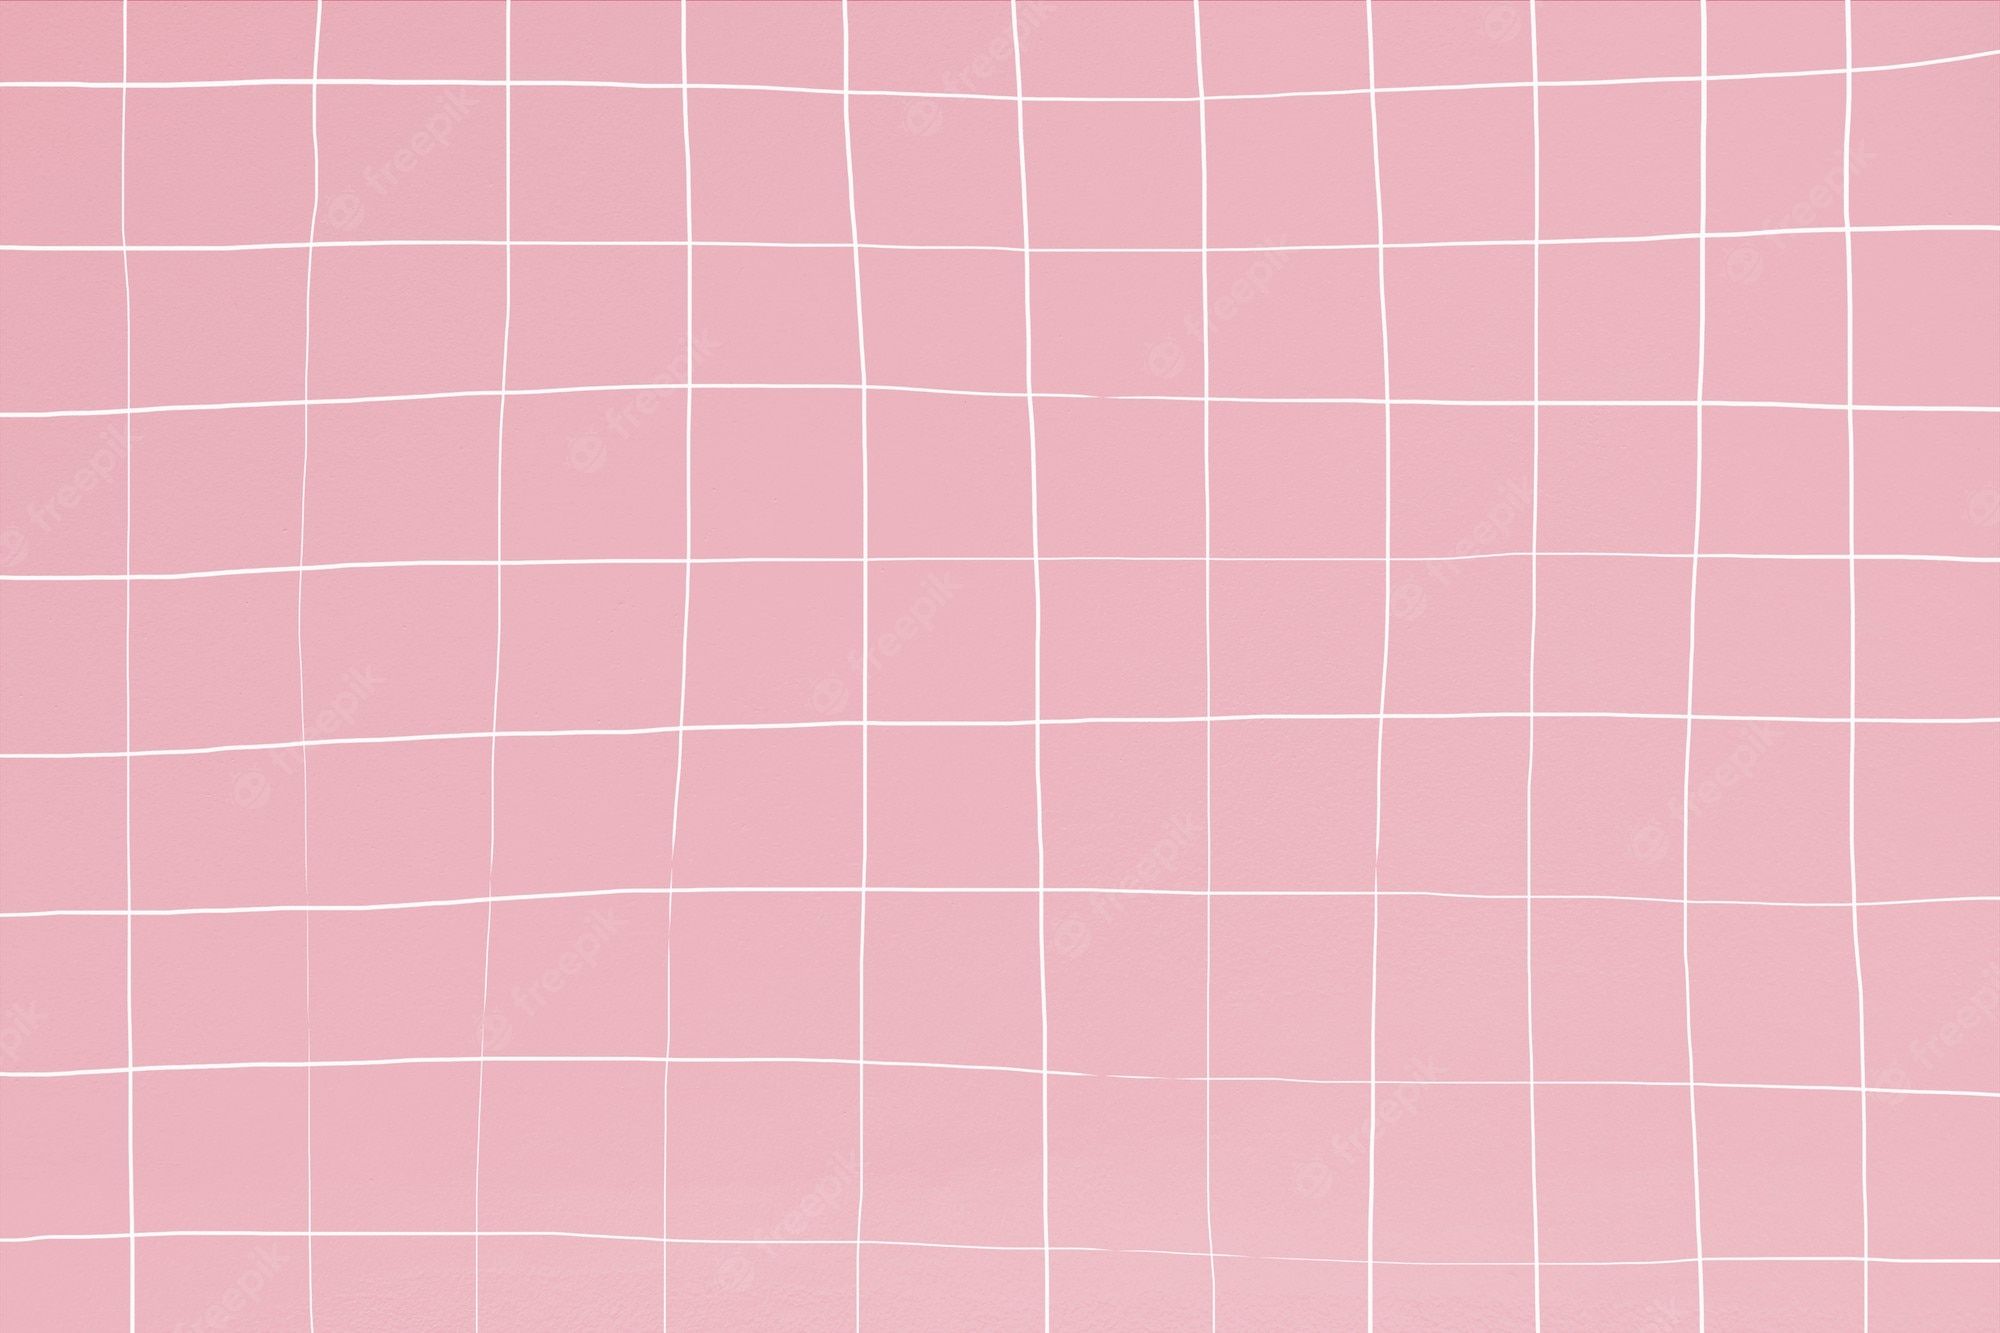 A pink background with a white grid - Grid